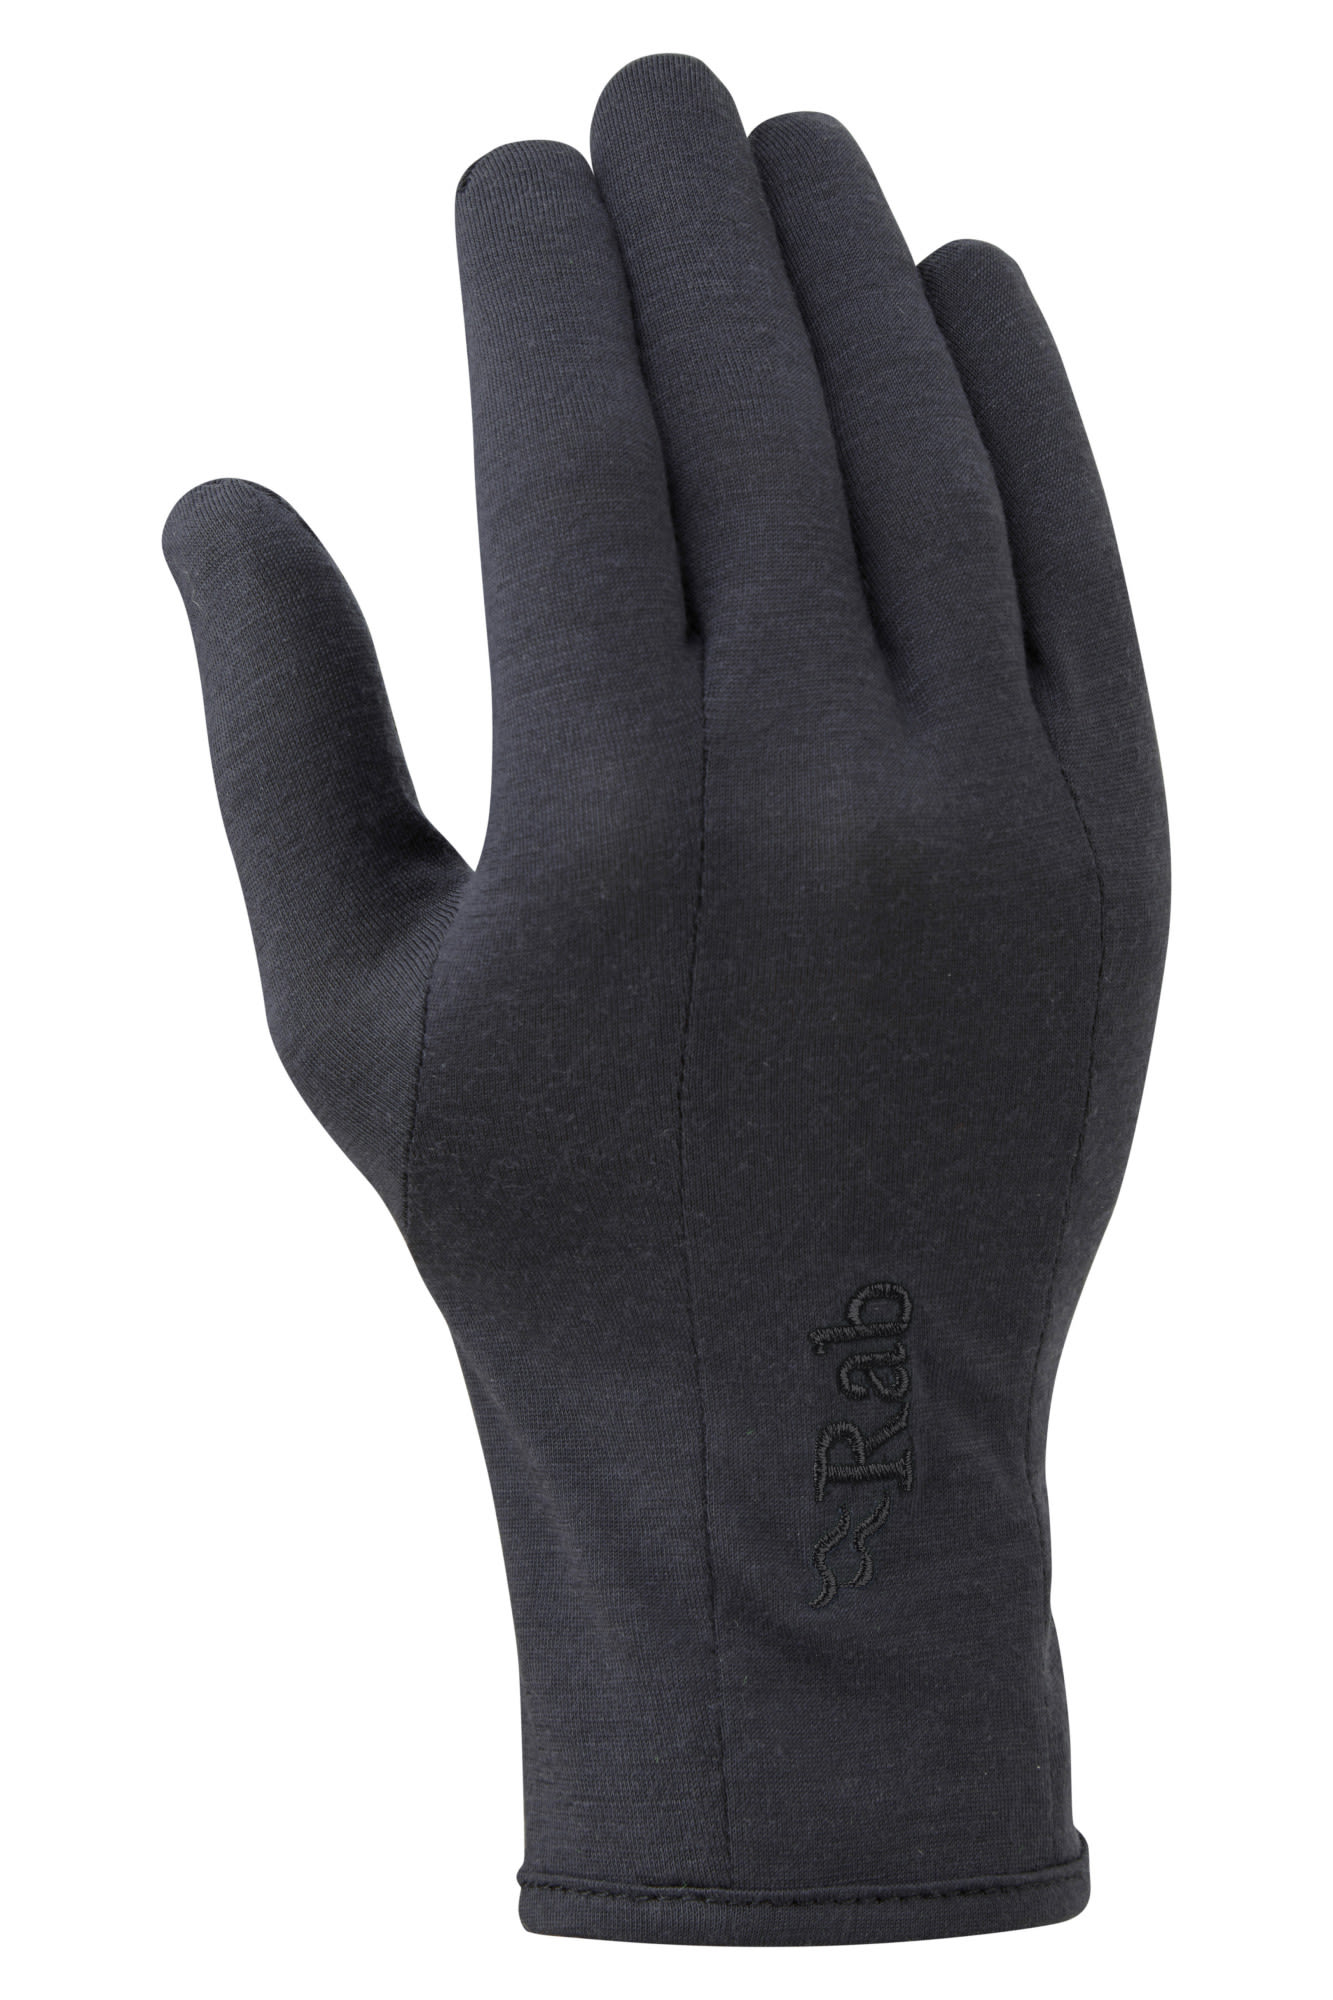 Rab Forge 160 Gloves